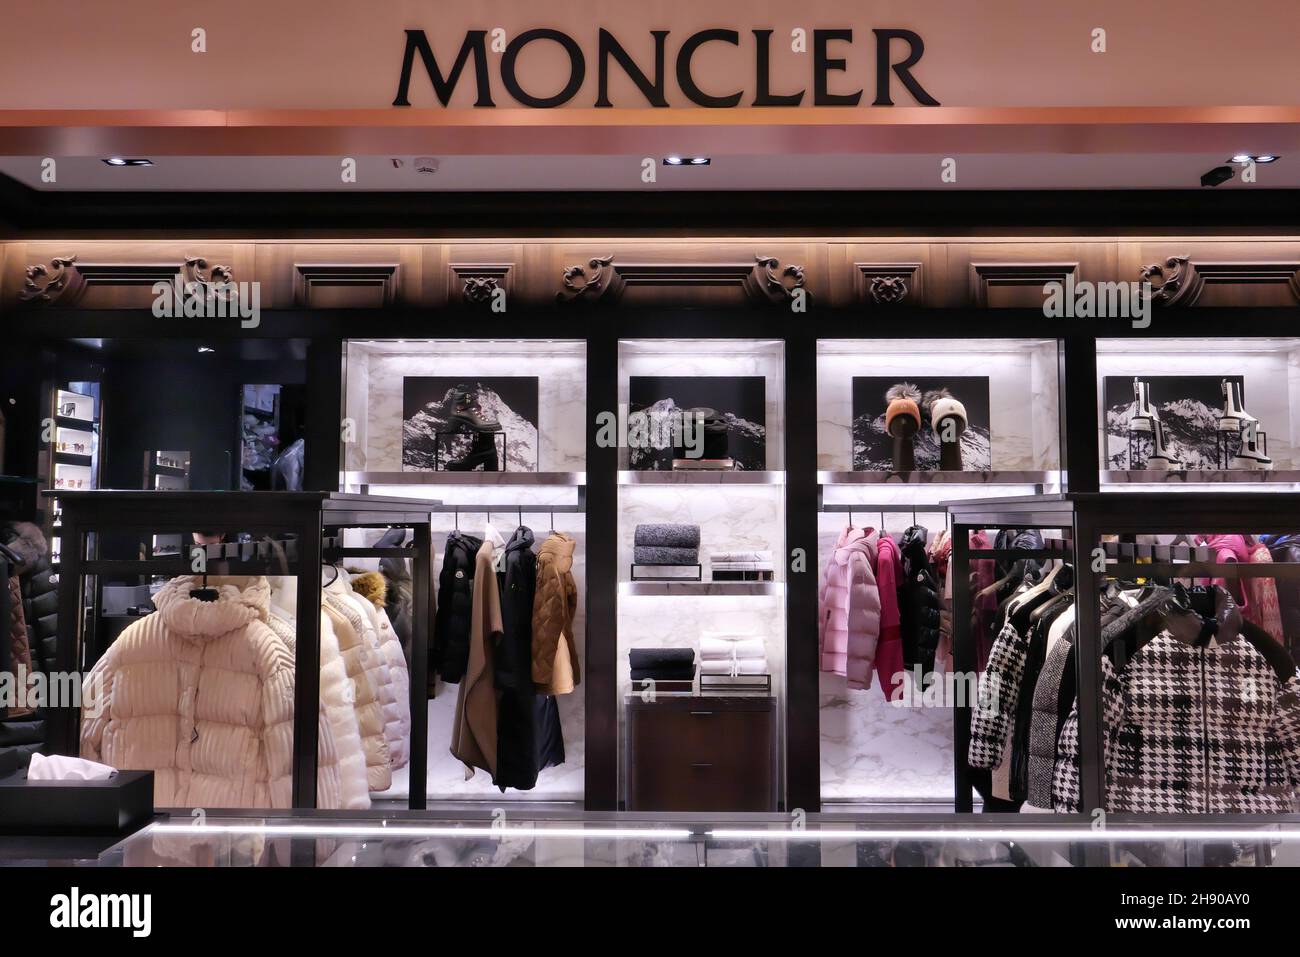 Moncler Shop High Resolution Stock Photography and Images - Alamy